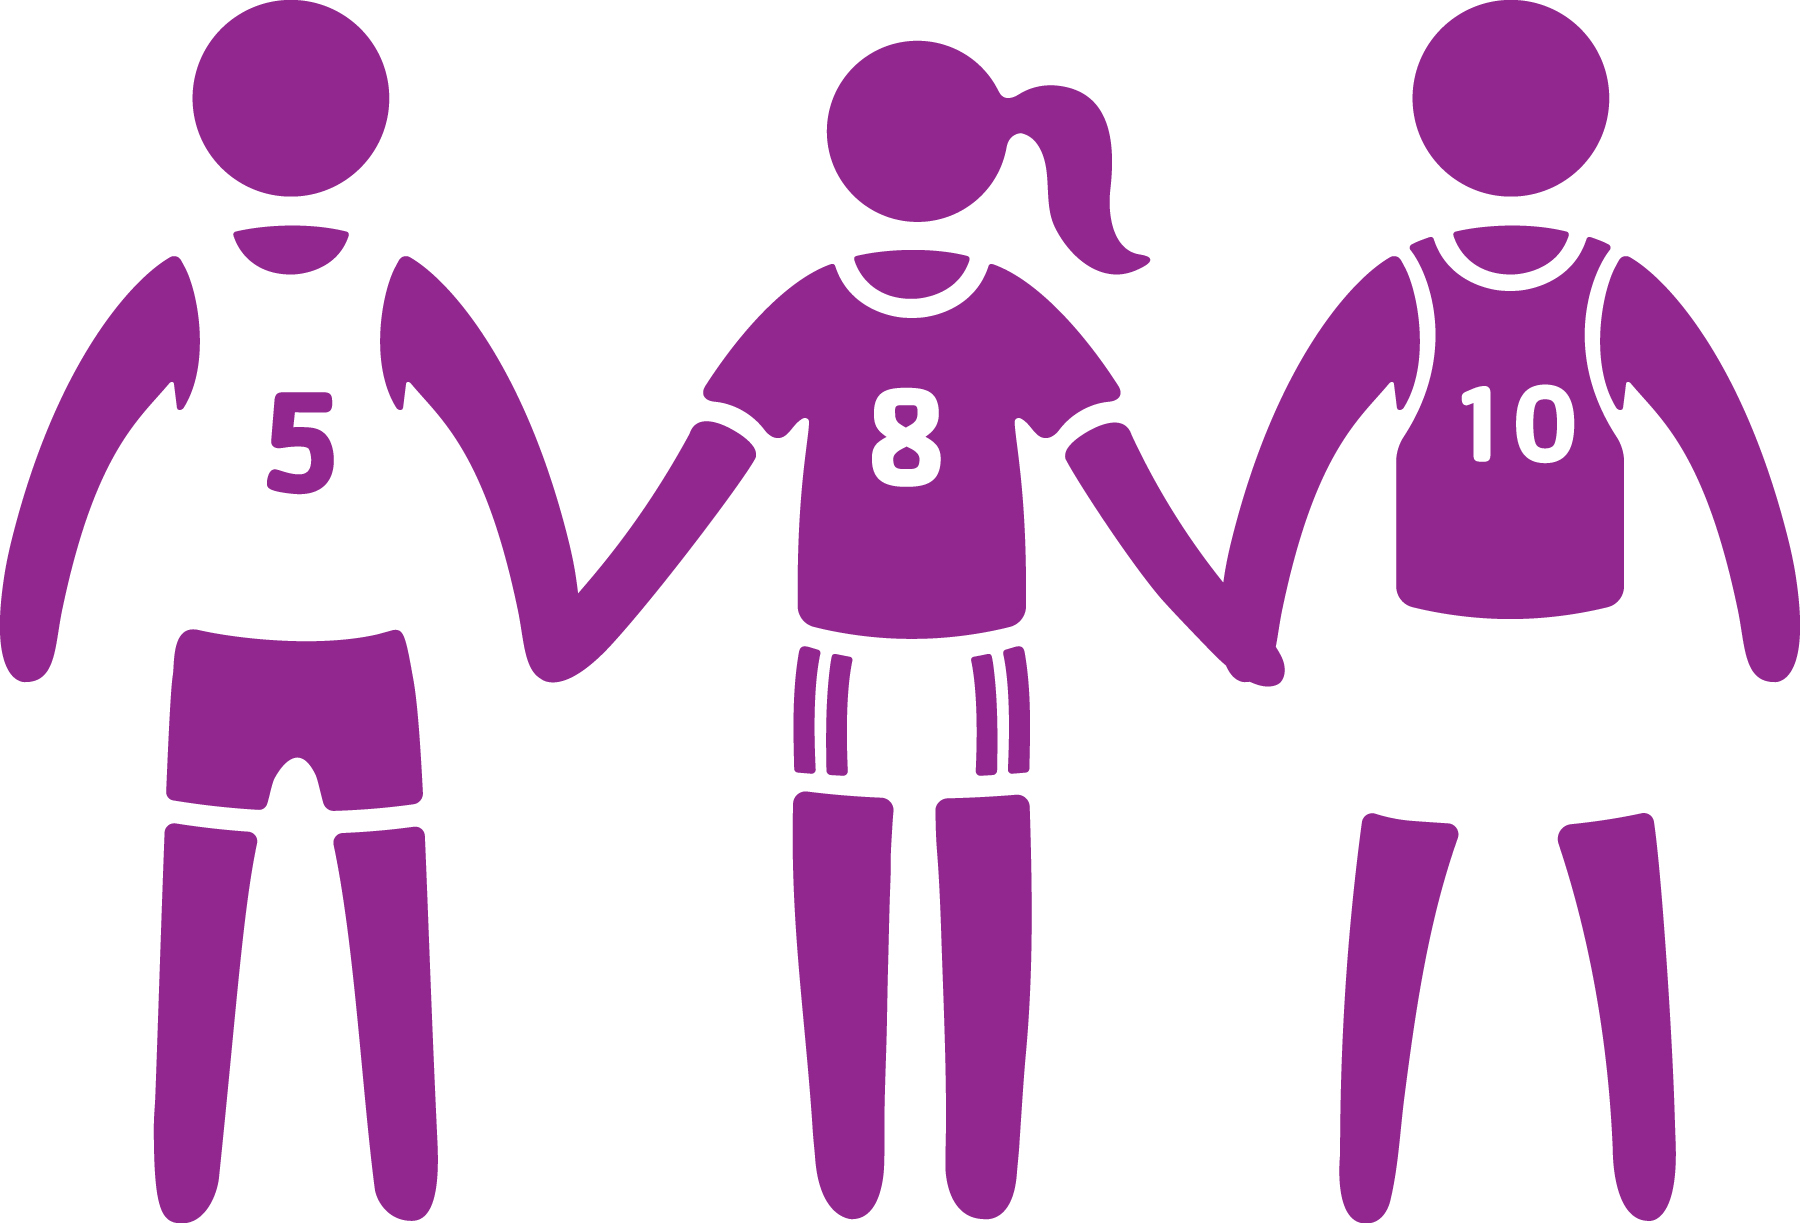 illustration of three students holding hands in sports jerseys